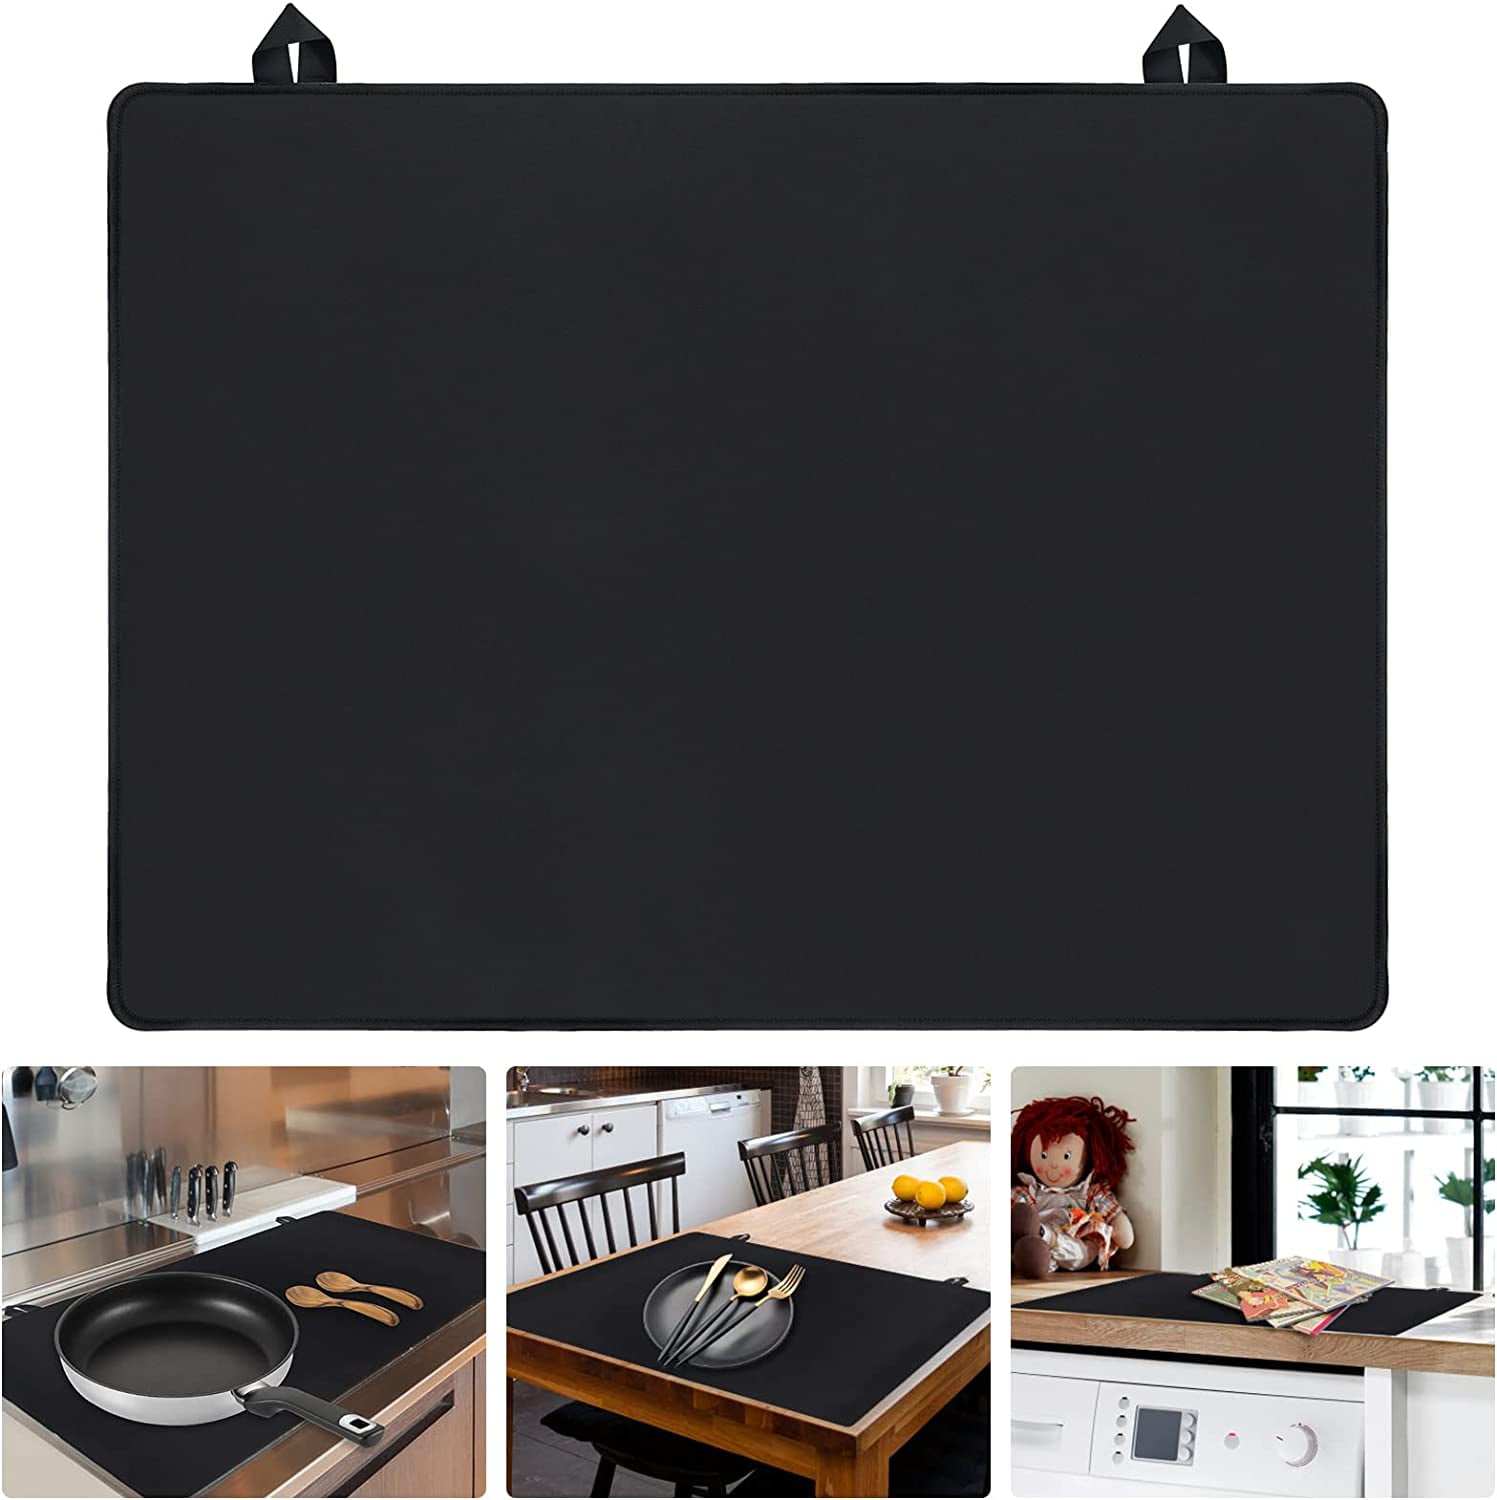  Stove Top Covers for Electric Stove with 2pcs Stove Gap Covers,  Stove Protector 28.5 x20.5 inch Heat Resistant for Glass Top Cooktop Cover  Flat Stove Top : Appliances